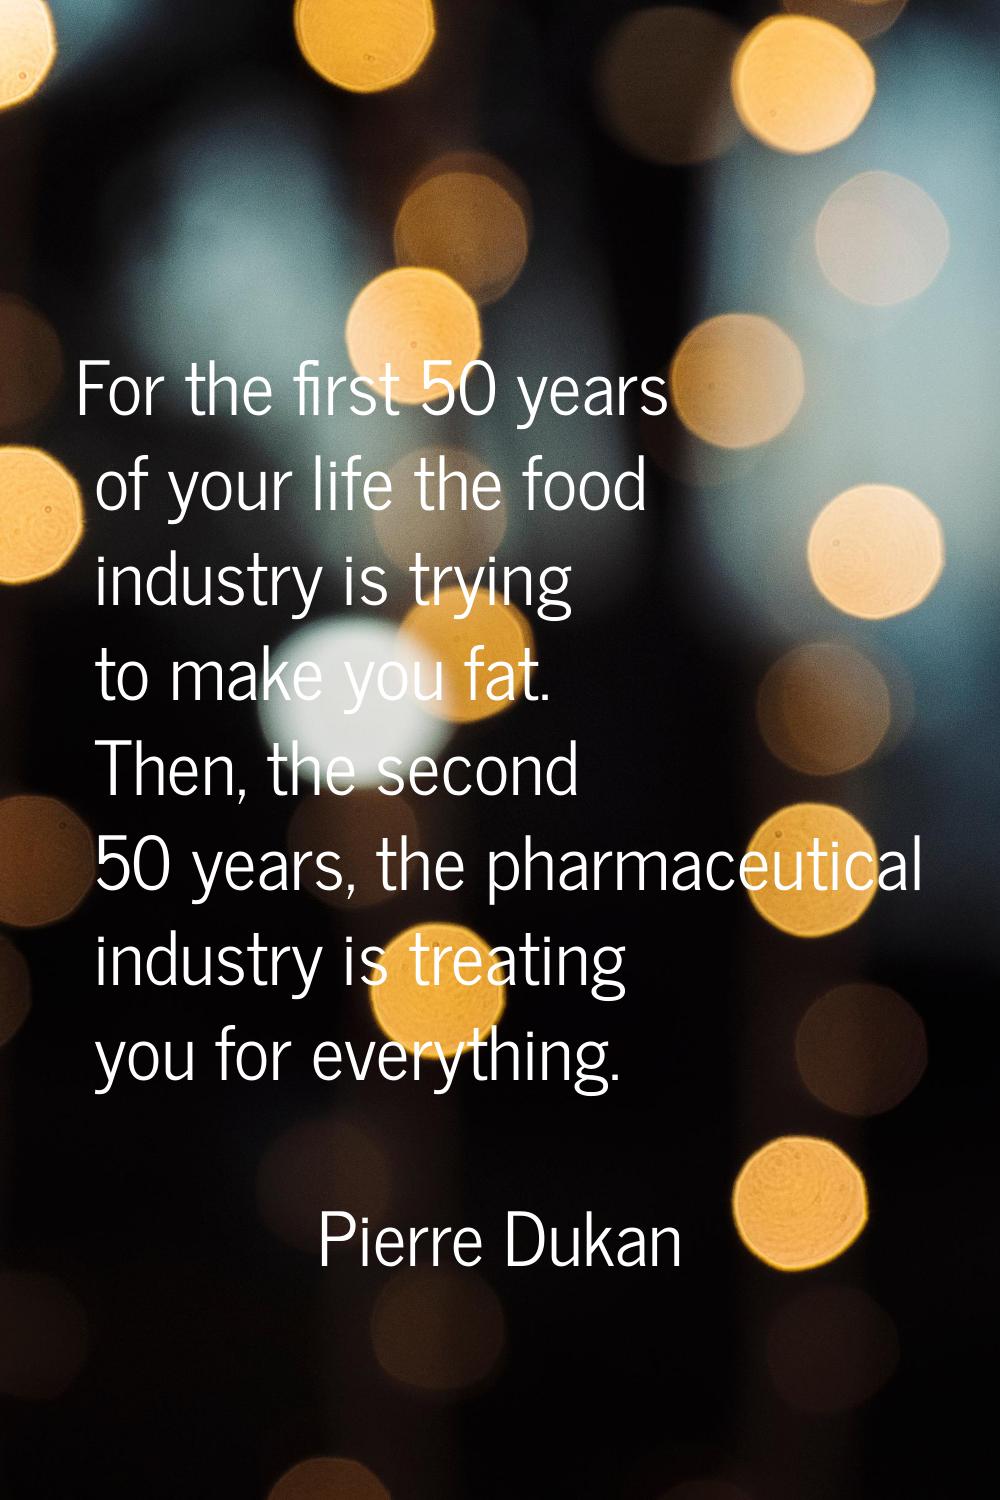 For the first 50 years of your life the food industry is trying to make you fat. Then, the second 5